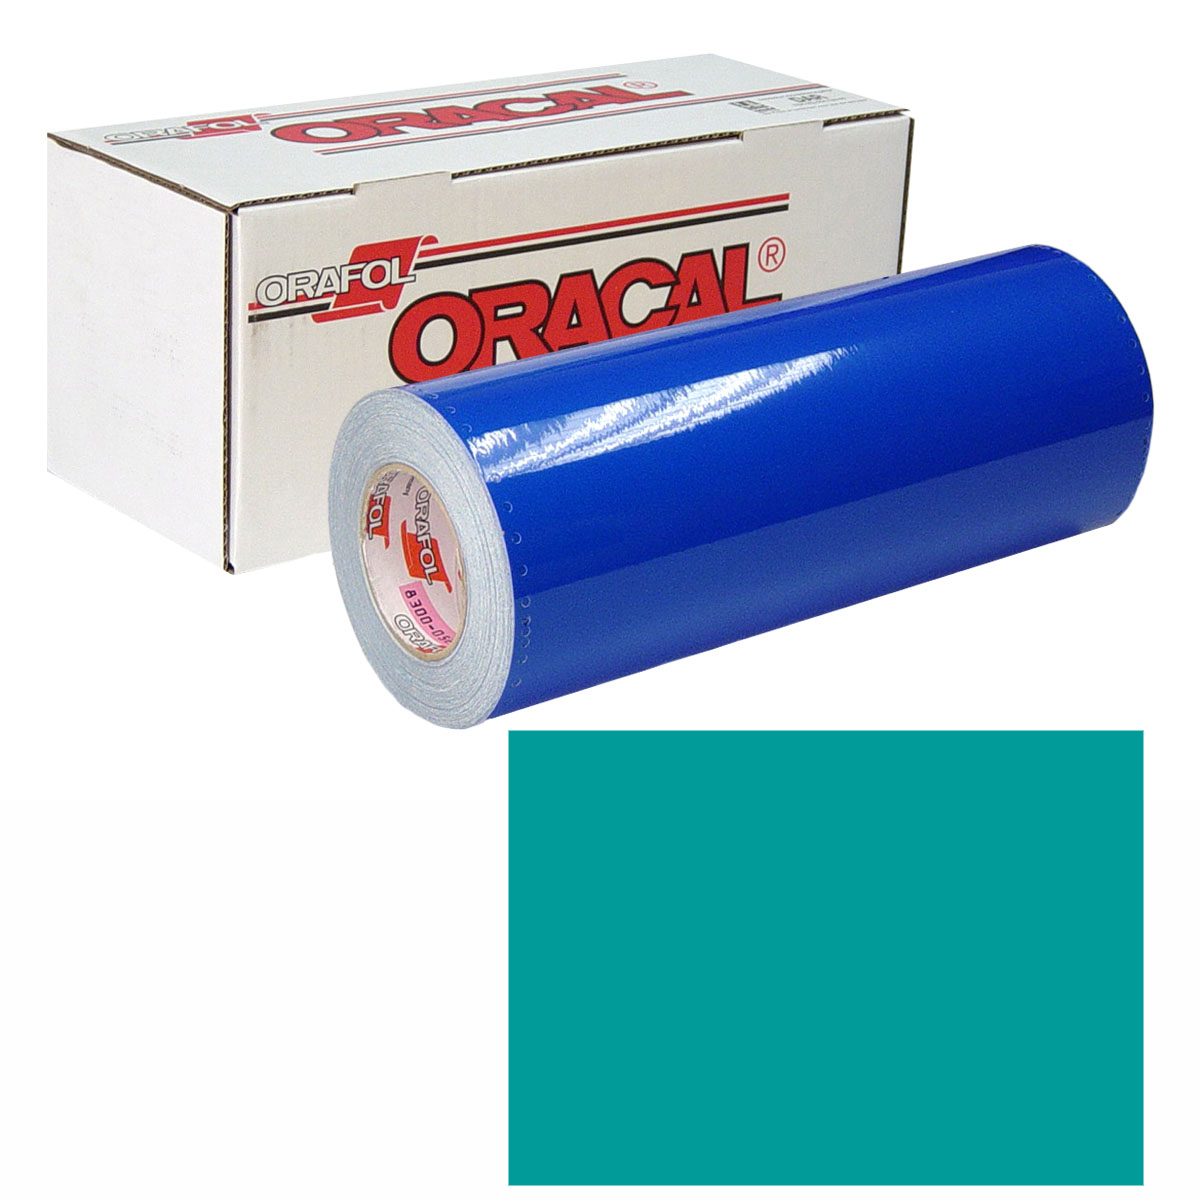 ORACAL 631 15in X 50yd 054 Turquoise